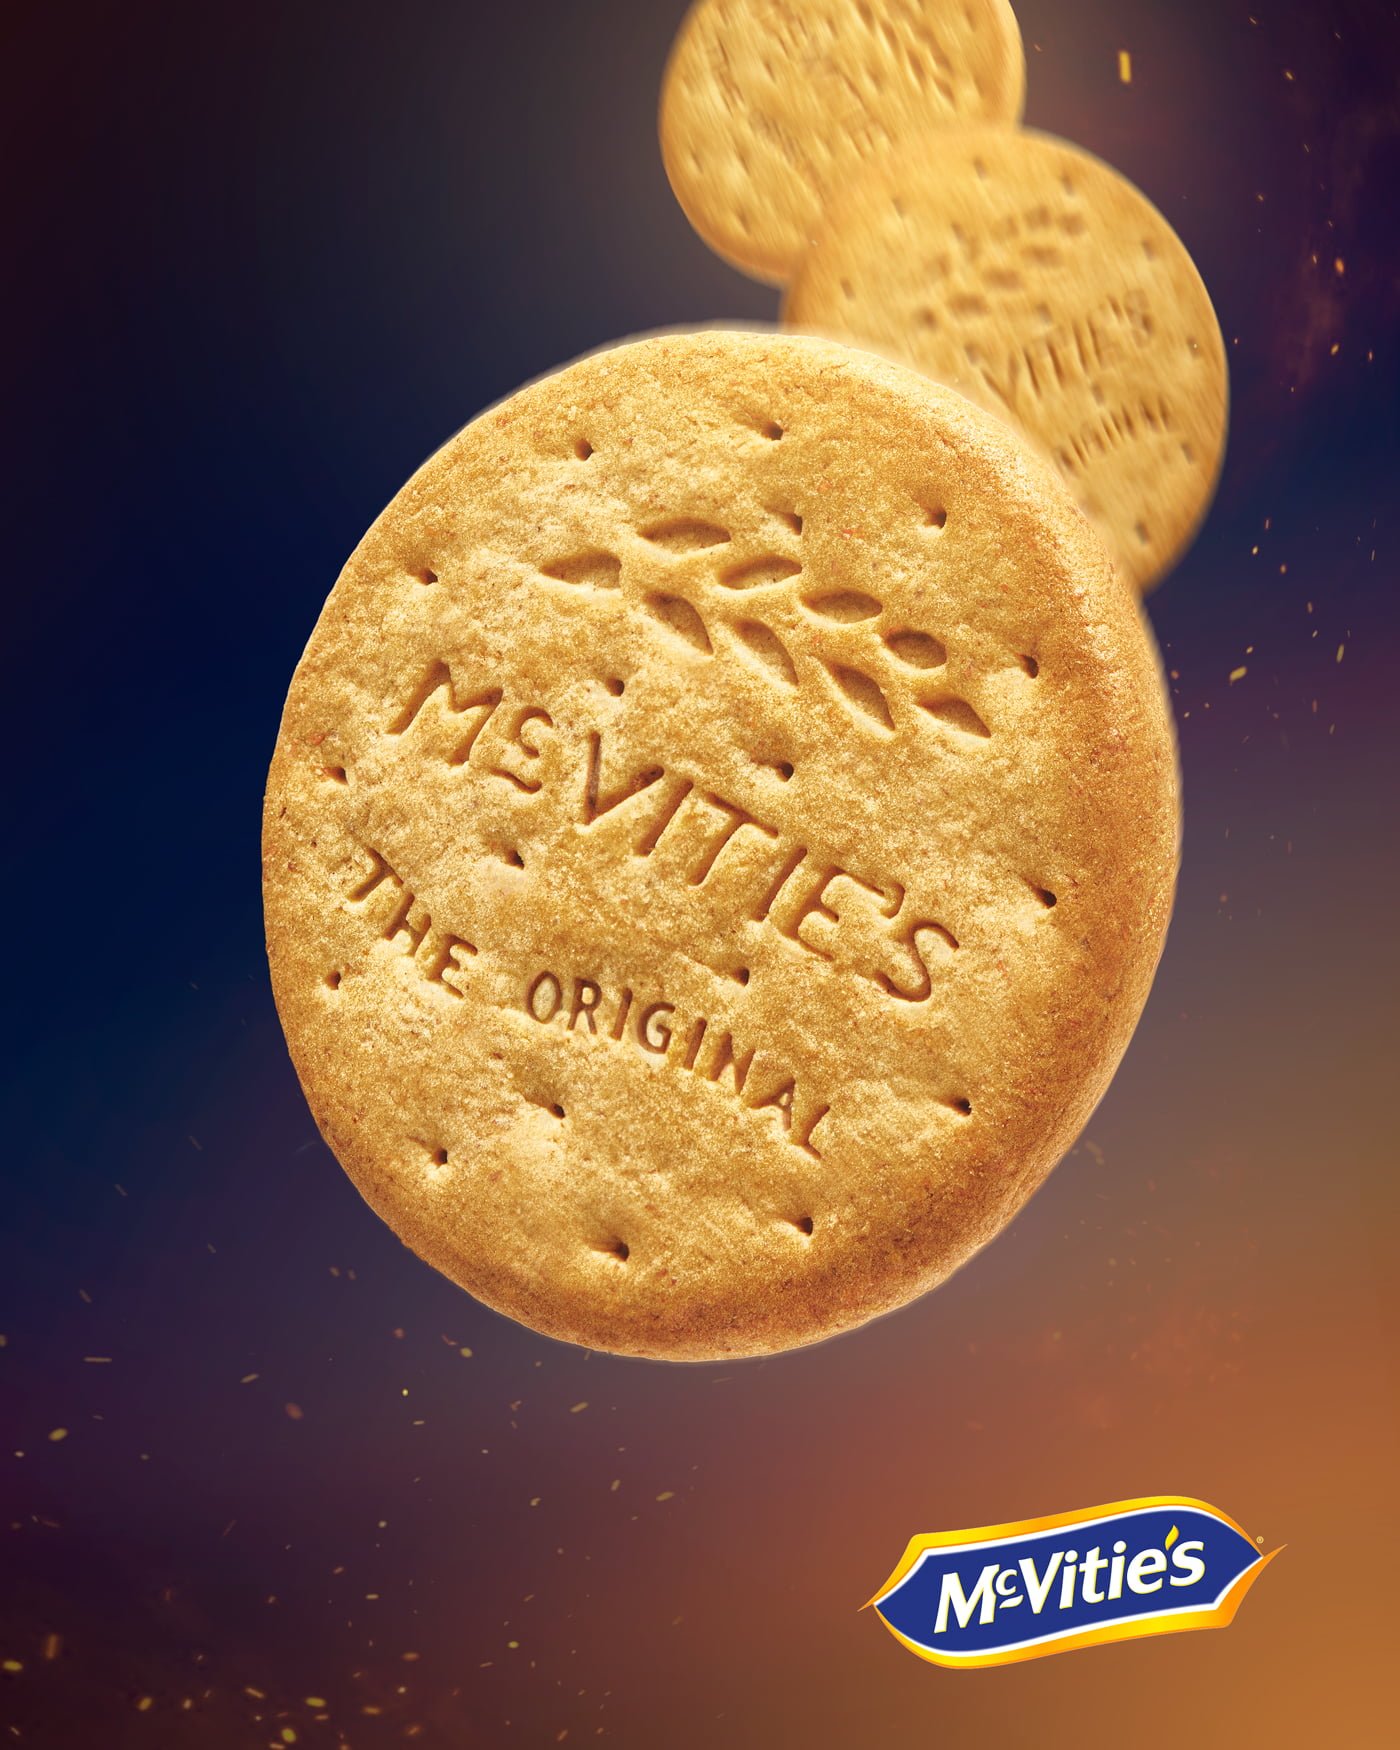 orginal digestive biscuits photographer mostafa Ismail, food Photography by mechanix studios, biscuit photography Mcvities brand. cairo Egypt